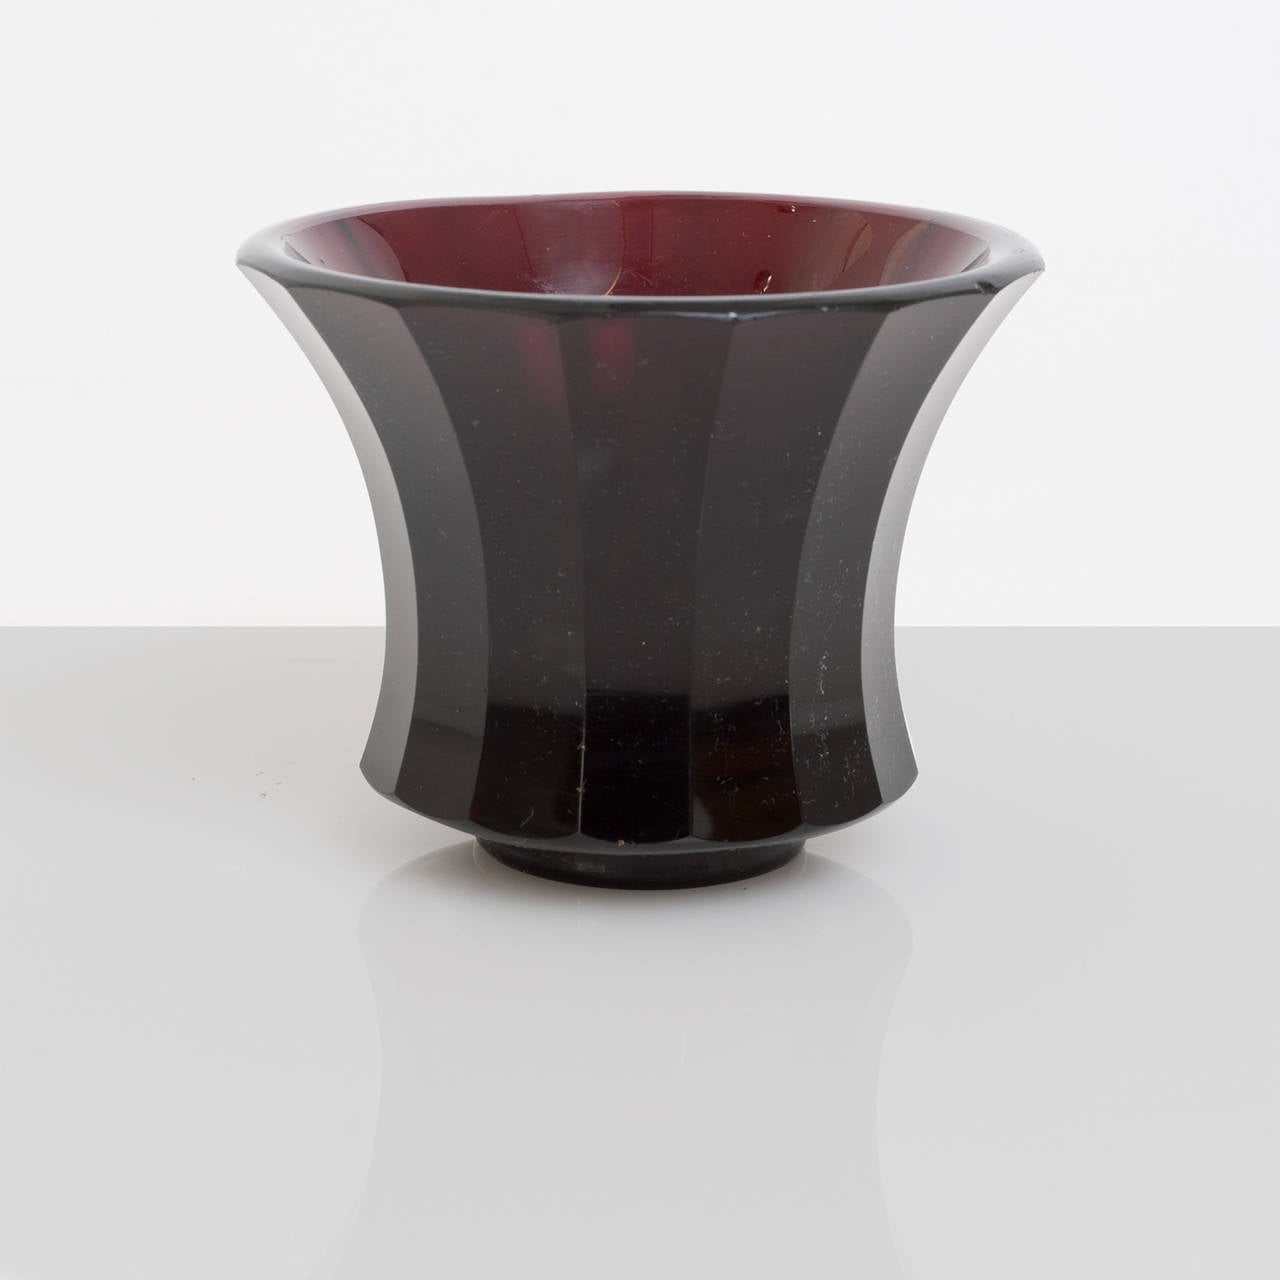 Small faceted dark red colored glass vase with highly polished surface. Attributed to Moser & Sohne, Austria. A minor chip under rim.
 
Height: 3.5", Diameter: 4.5"